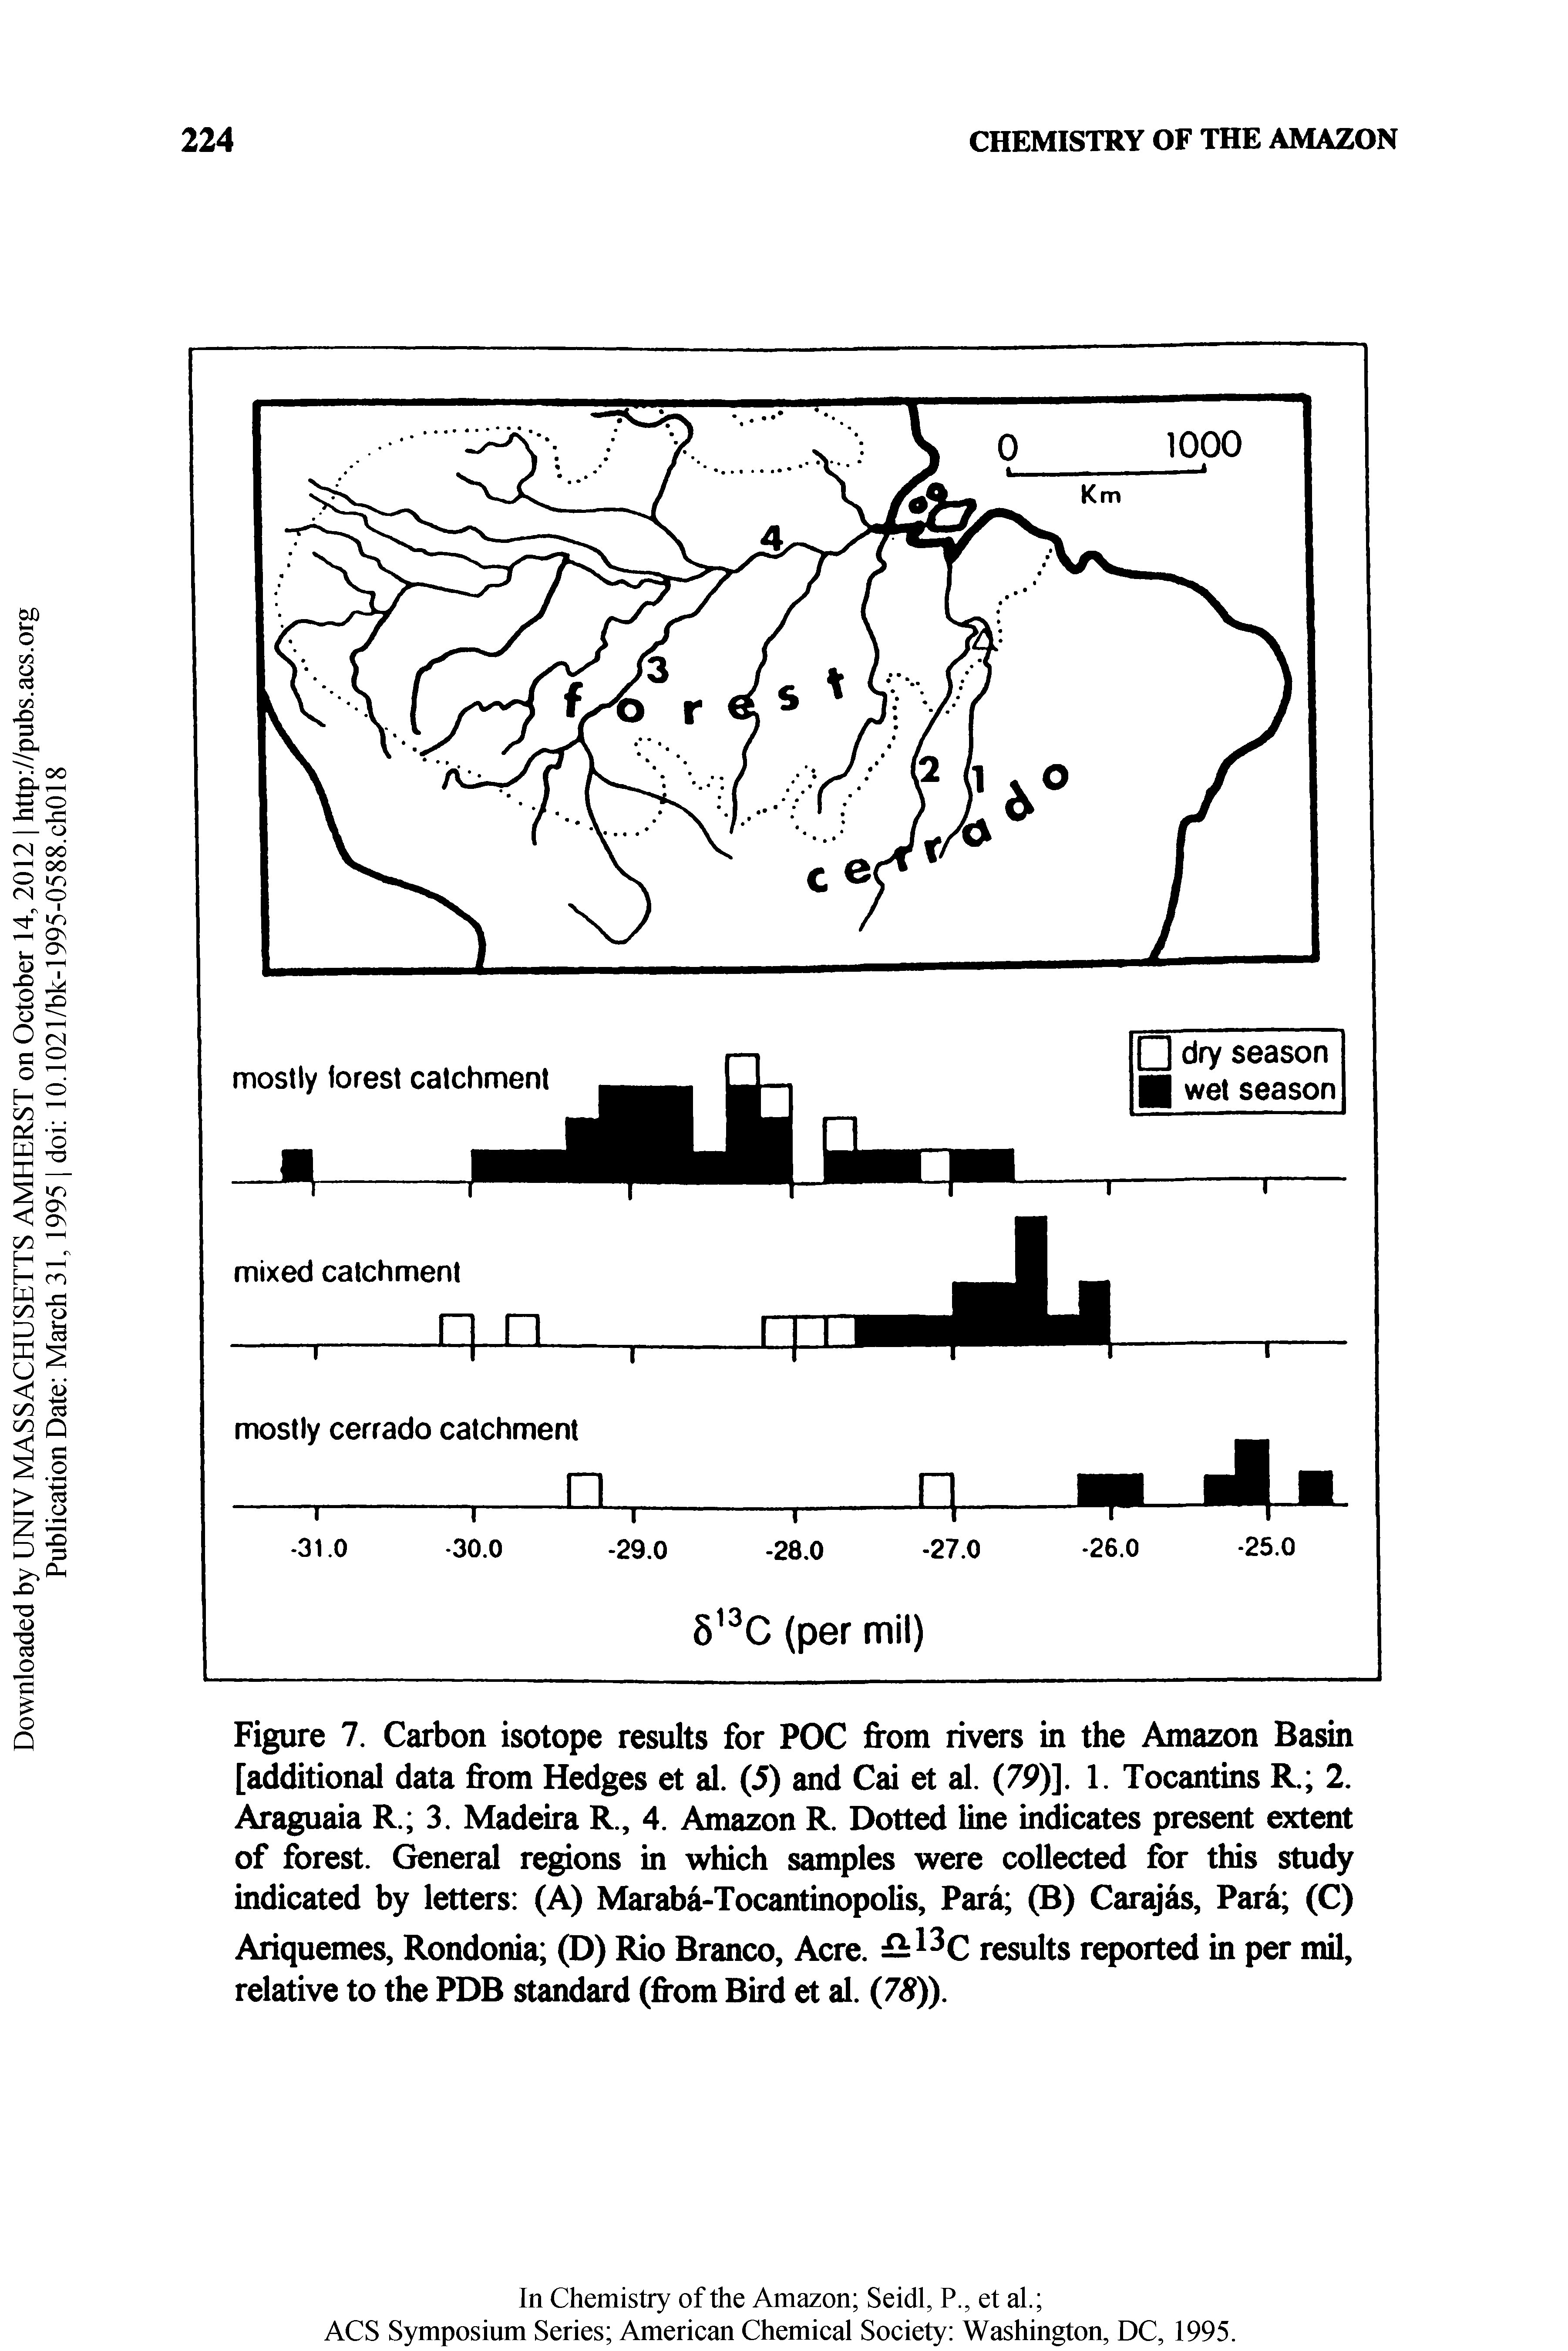 Figure 7. Carbon isotope results for POC from rivers in the Amazon Basin [additional data from Hedges et al. (5) and Cai et al. (79)], 1. Tocantins R. 2, Araguaia R. 3. Madeira R., 4. Amazon R. Dotted line indicates present extent of forest. General regions in which samples were collected for this study indicated by letters (A) Maraba-Tocantinopolis, Para (B) Caraj, Para (C) Ariquemes, Rondonia (D) Rio Branco, Acre. results reported in per mil, relative to the PDB standard (from Bird et al. (78)).